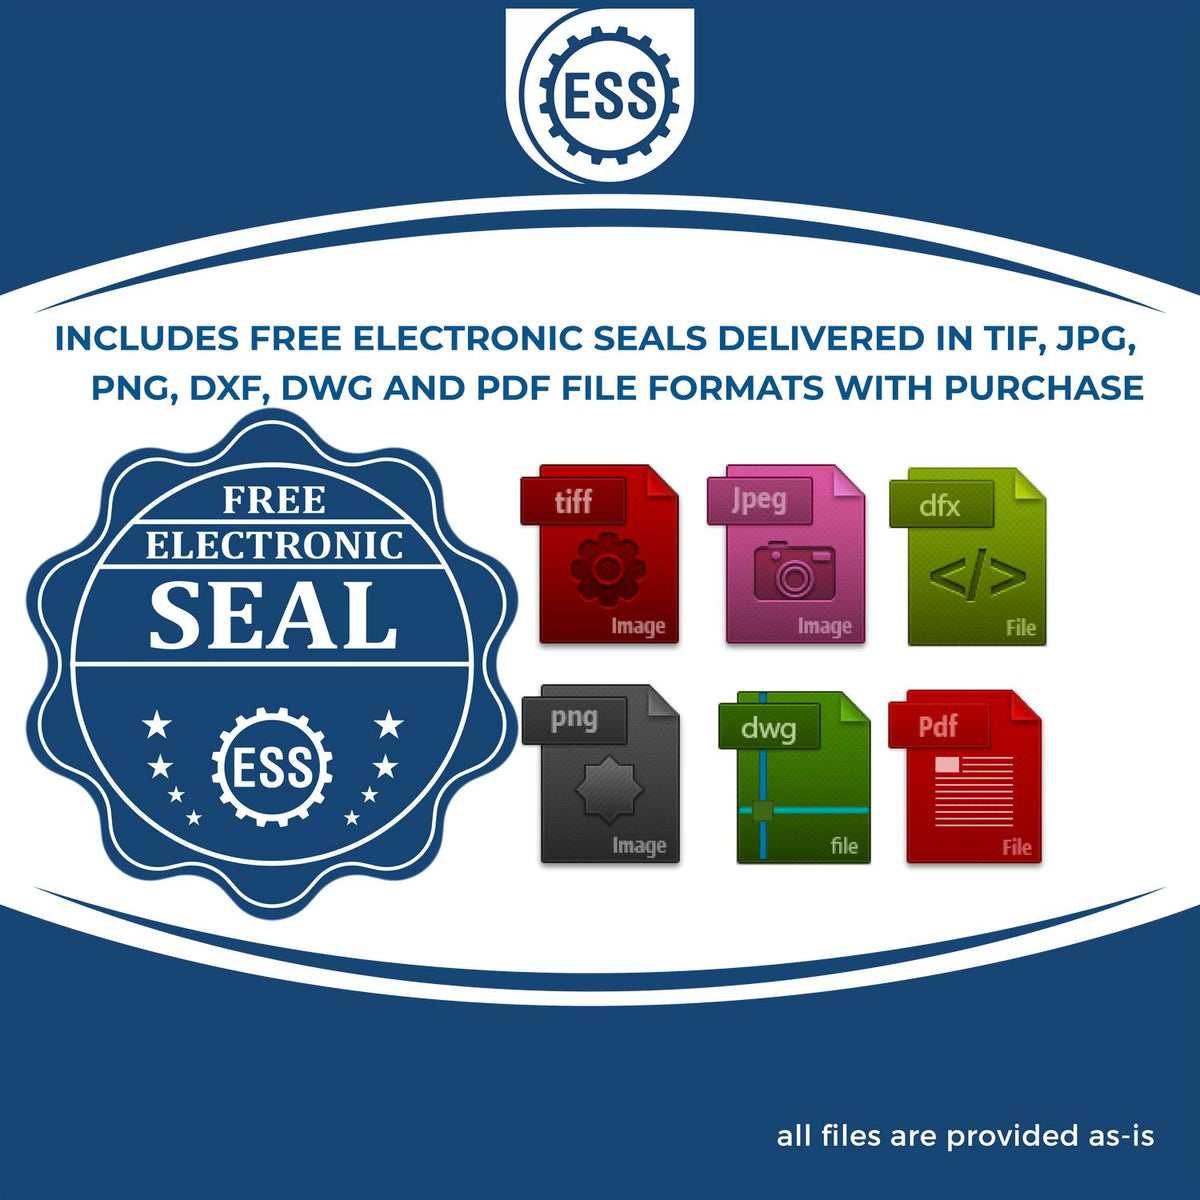 An infographic for the free electronic seal for the Gift South Carolina Land Surveyor Seal illustrating the different file type icons such as DXF, DWG, TIF, JPG and PNG.